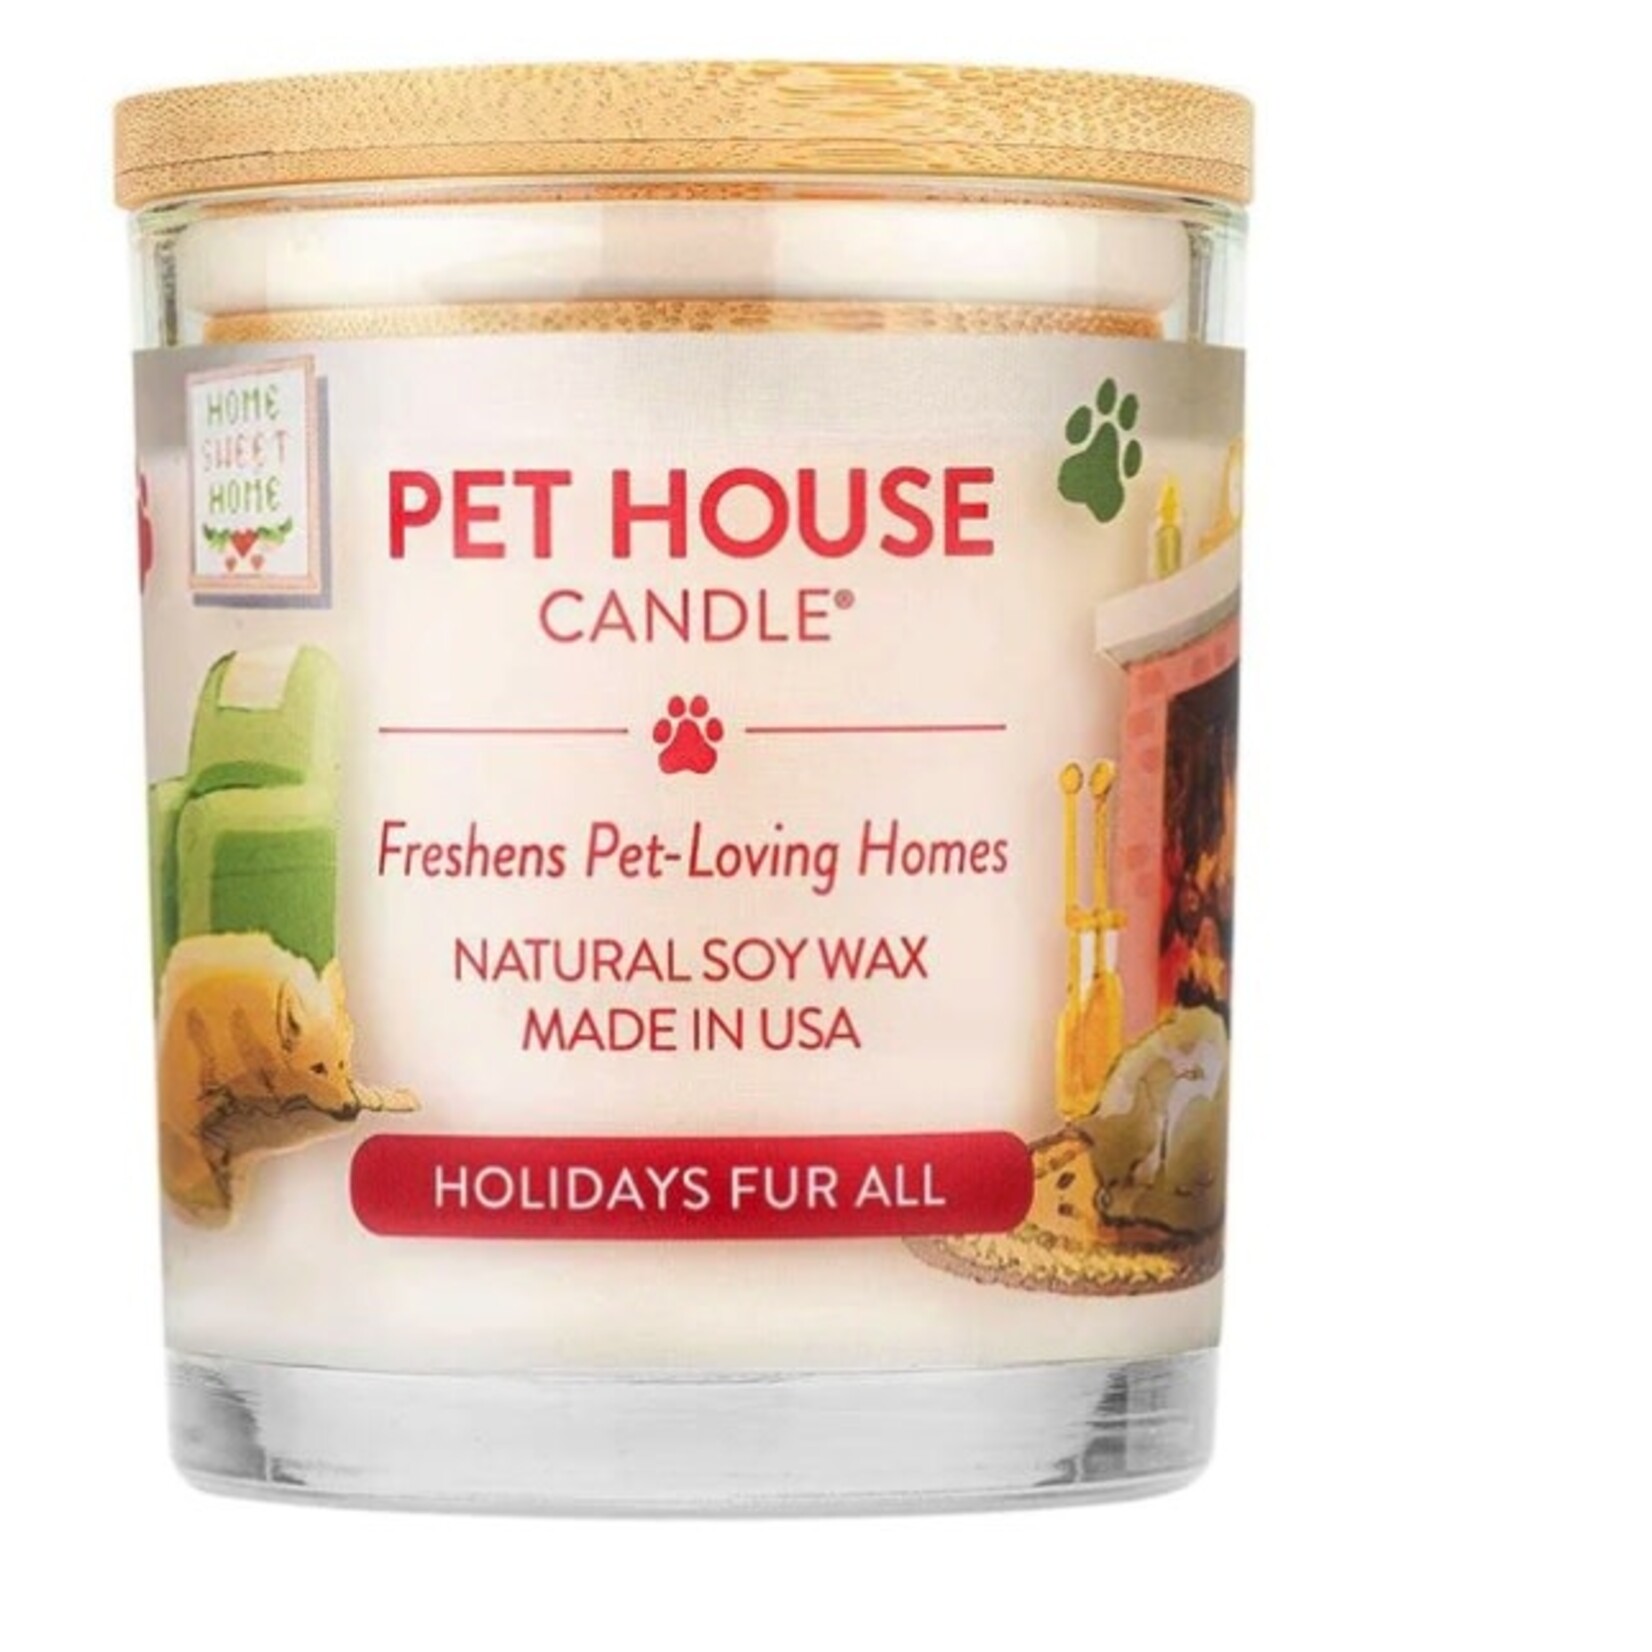 PET HOUSE CANDLE Pet House Candle Holidays Fur all